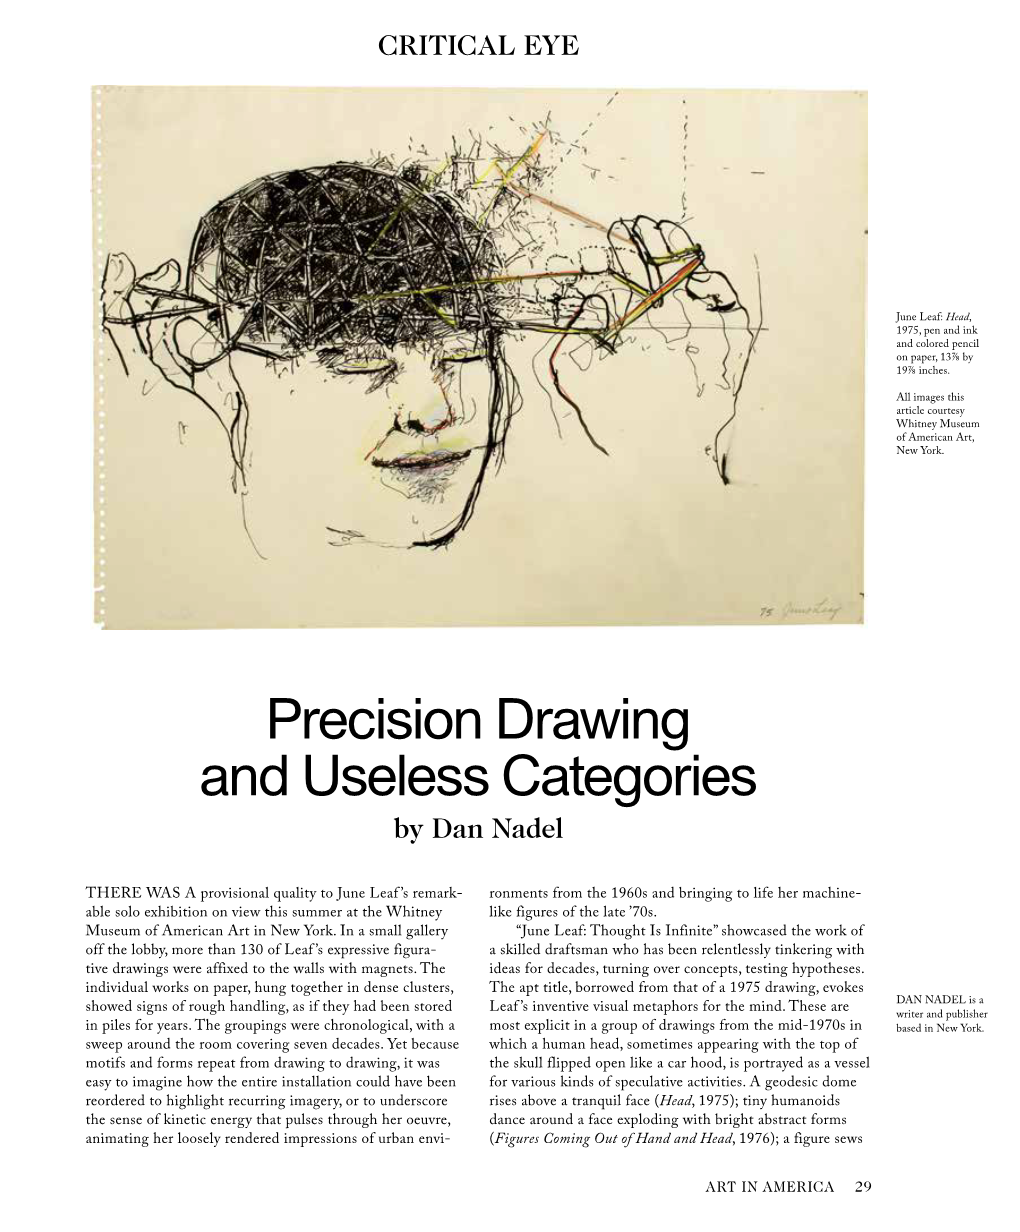 Precision Drawing and Useless Categories by Dan Nadel